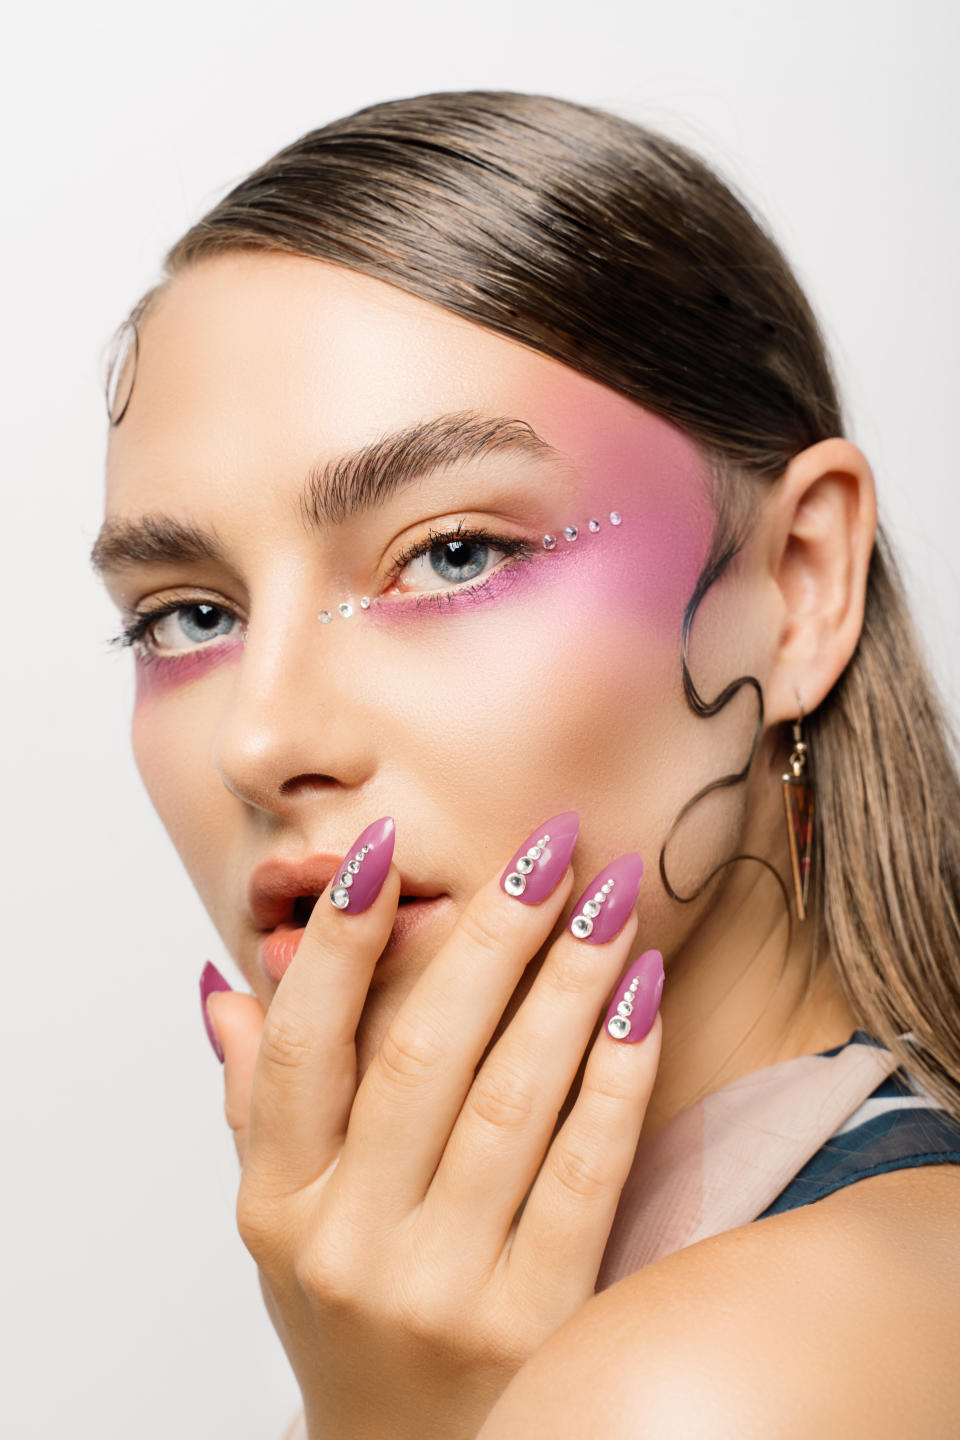 Kyutee nails from the Spring 2022 collection set to launch this spring. - Credit: Marcelino Michael Madjid